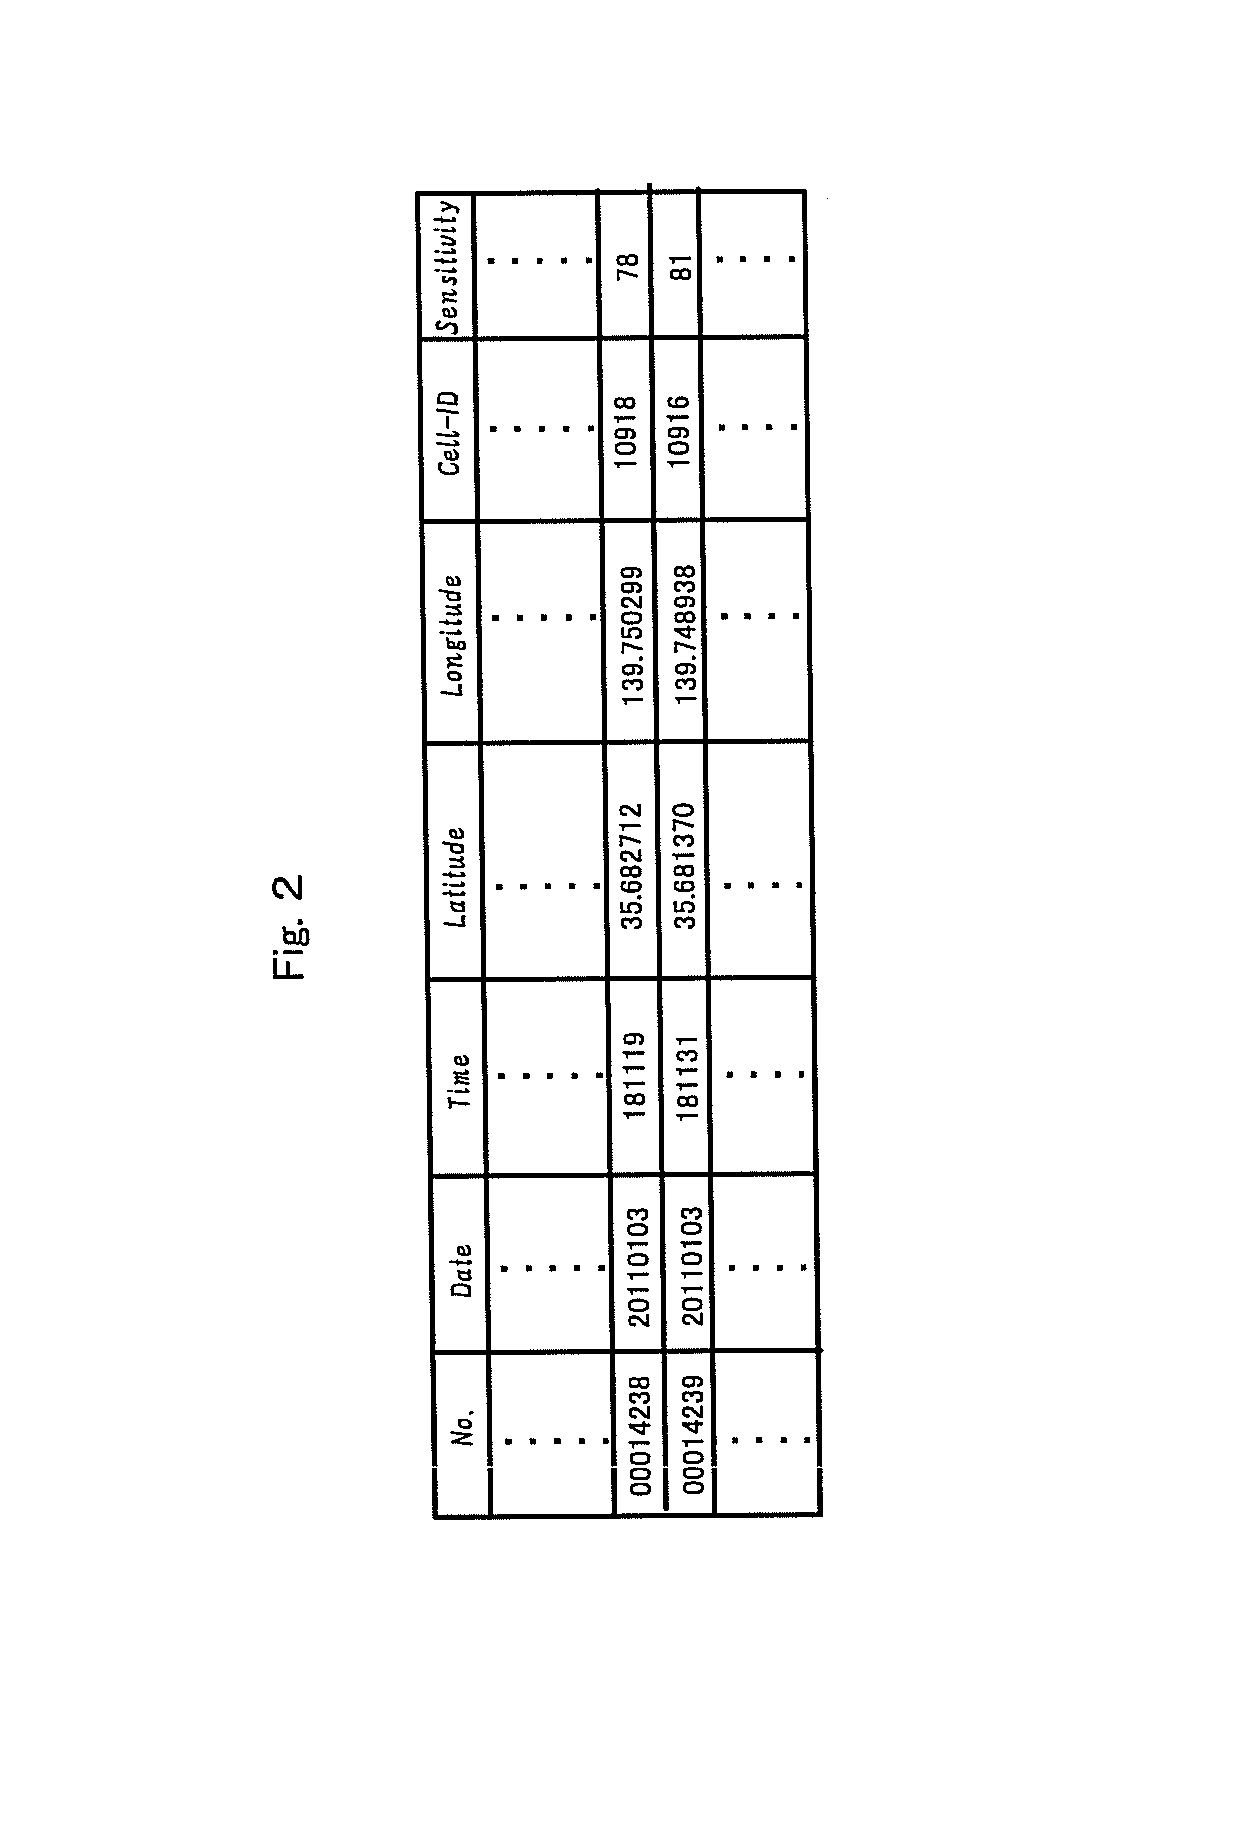 Automatic logon support method and system